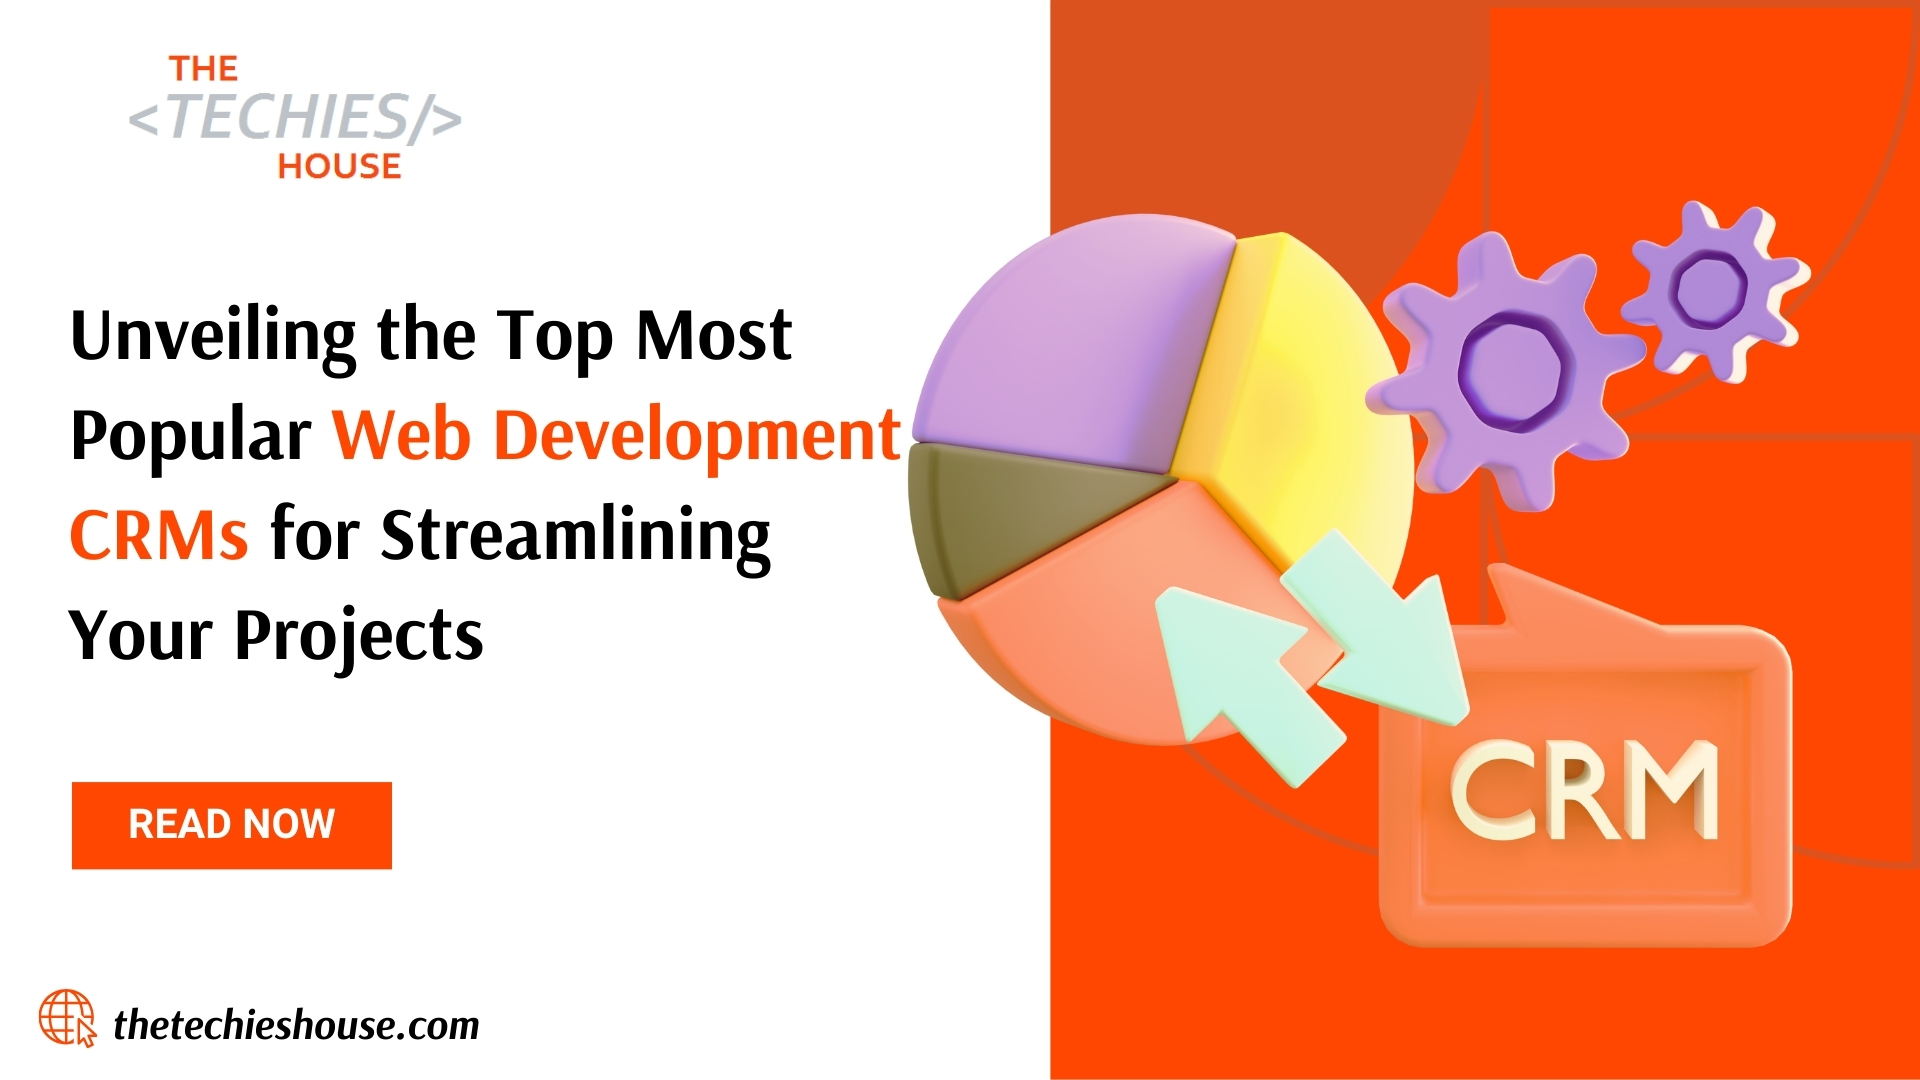 Unveiling the Top Most Popular Web Development CRMs for Streamlining Your Projects